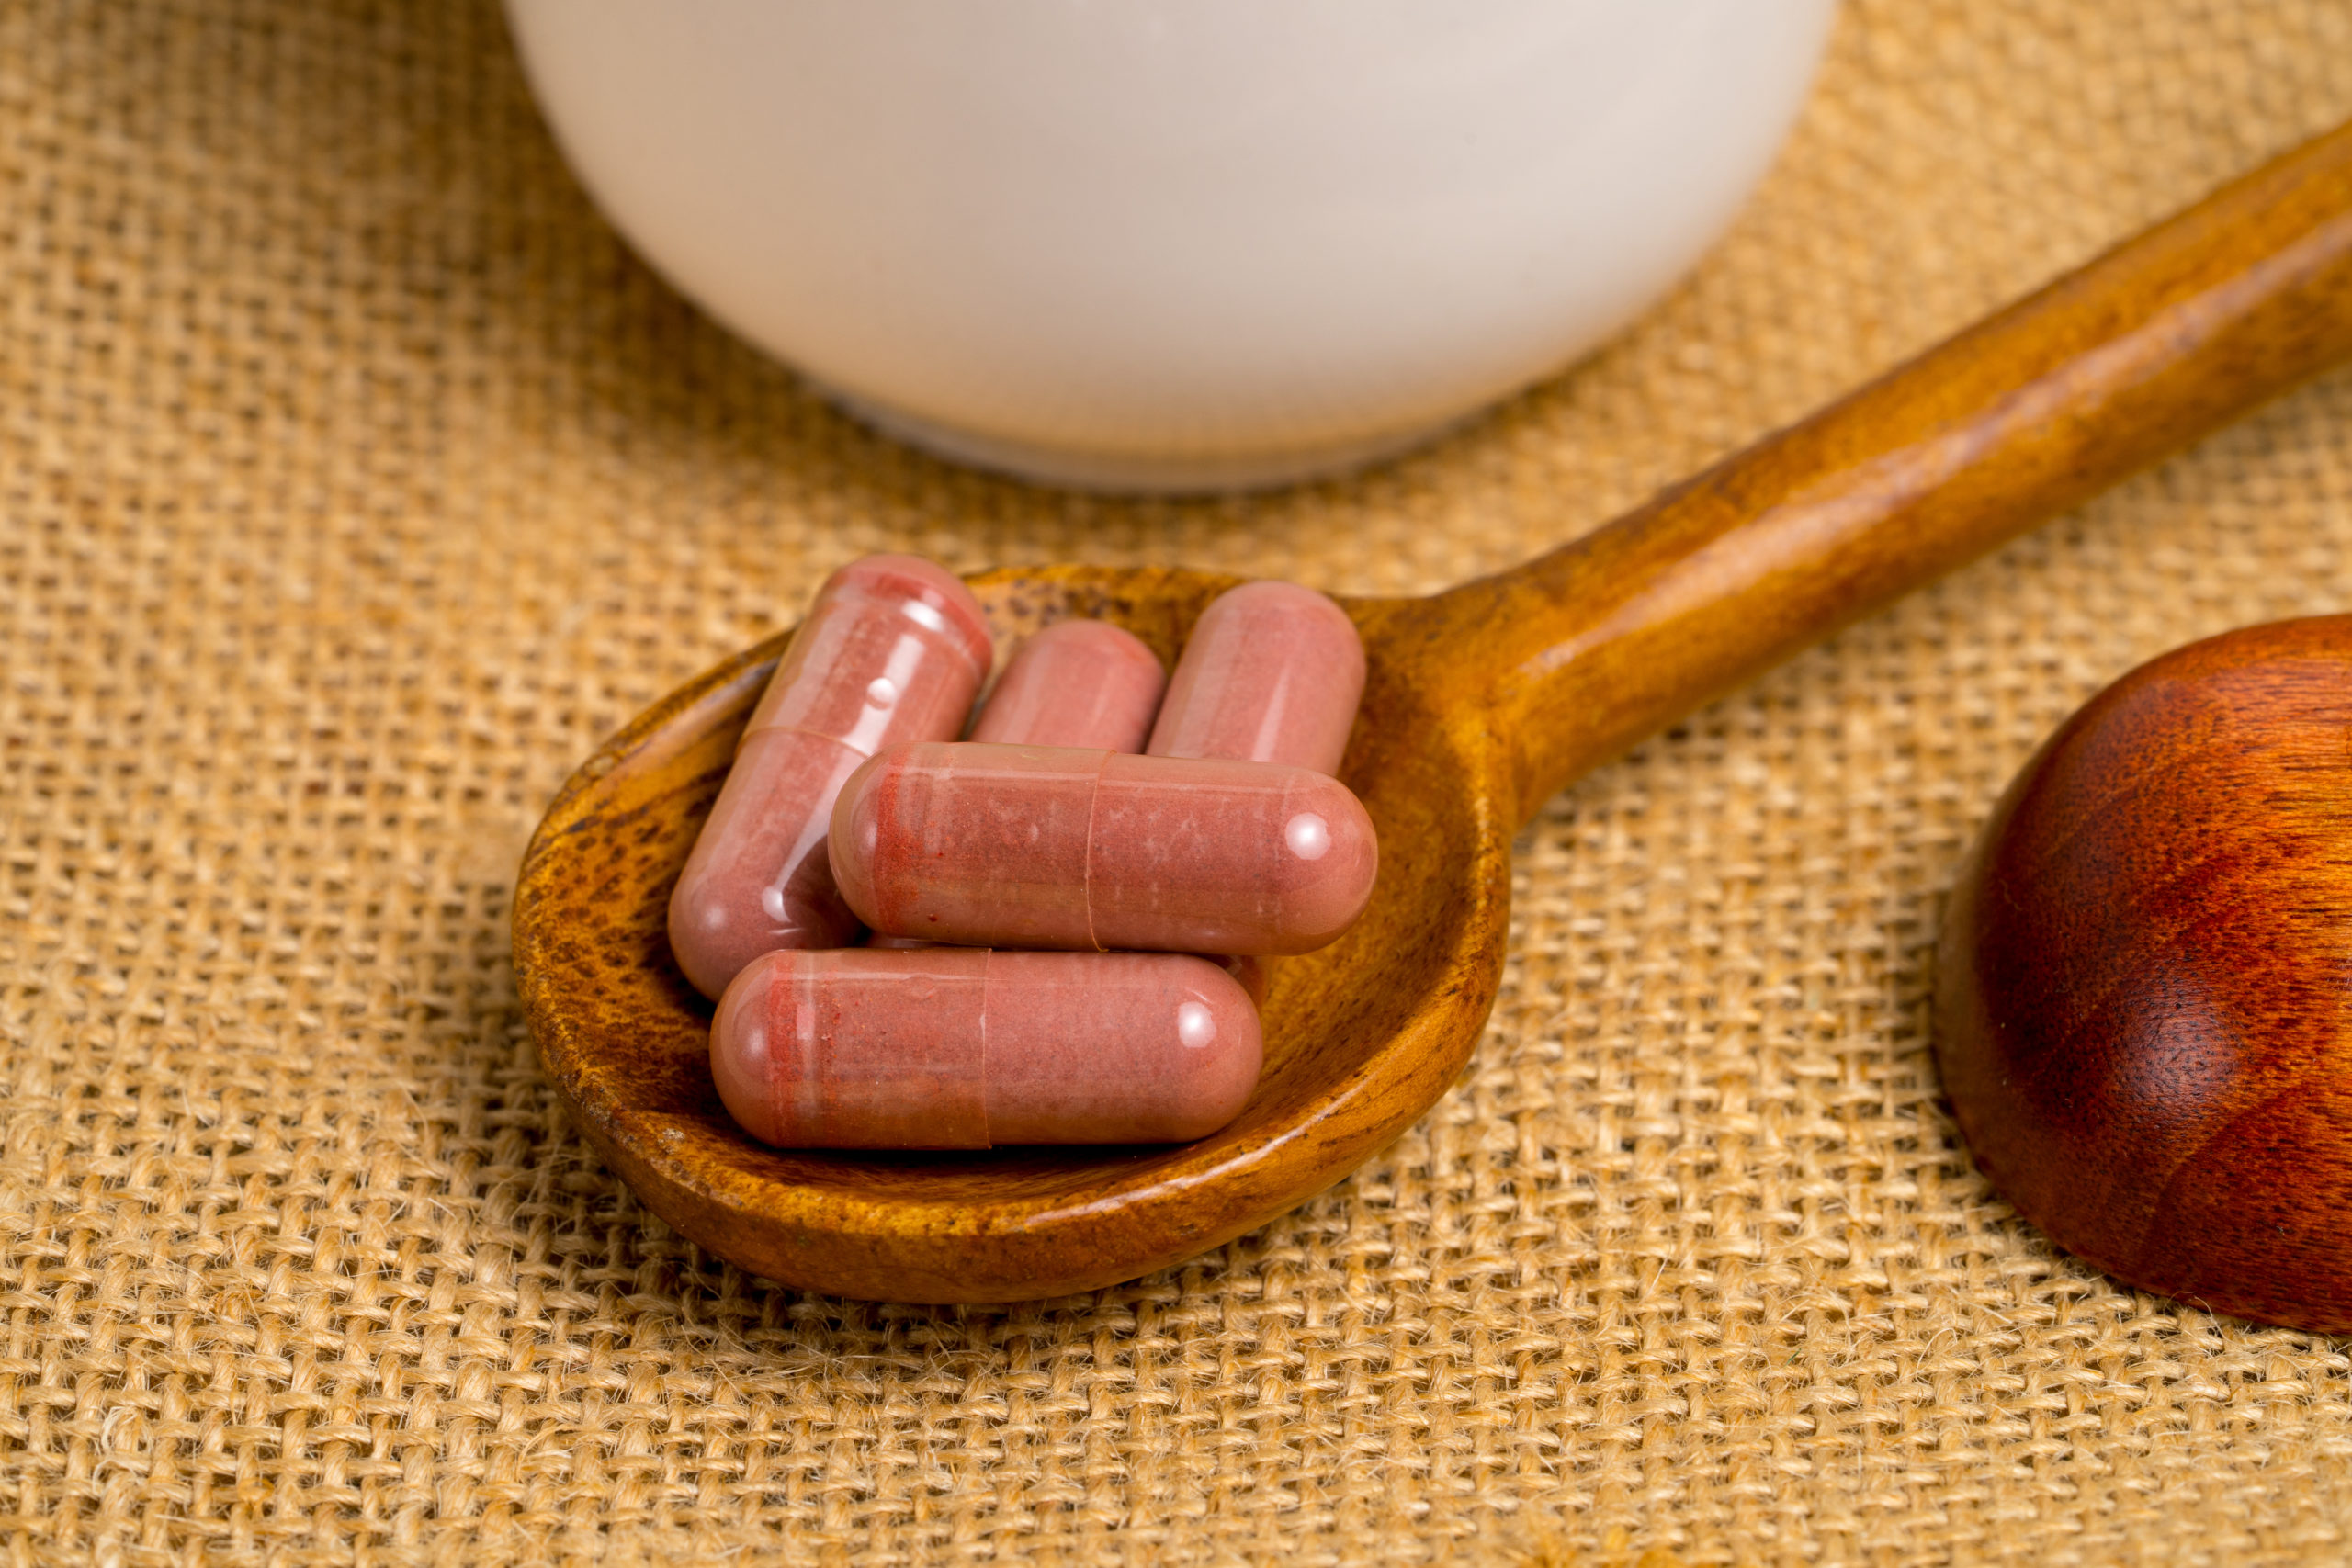 mesterværk score forhold Learn About Red Yeast Rice Supplement Benefits | Cooper